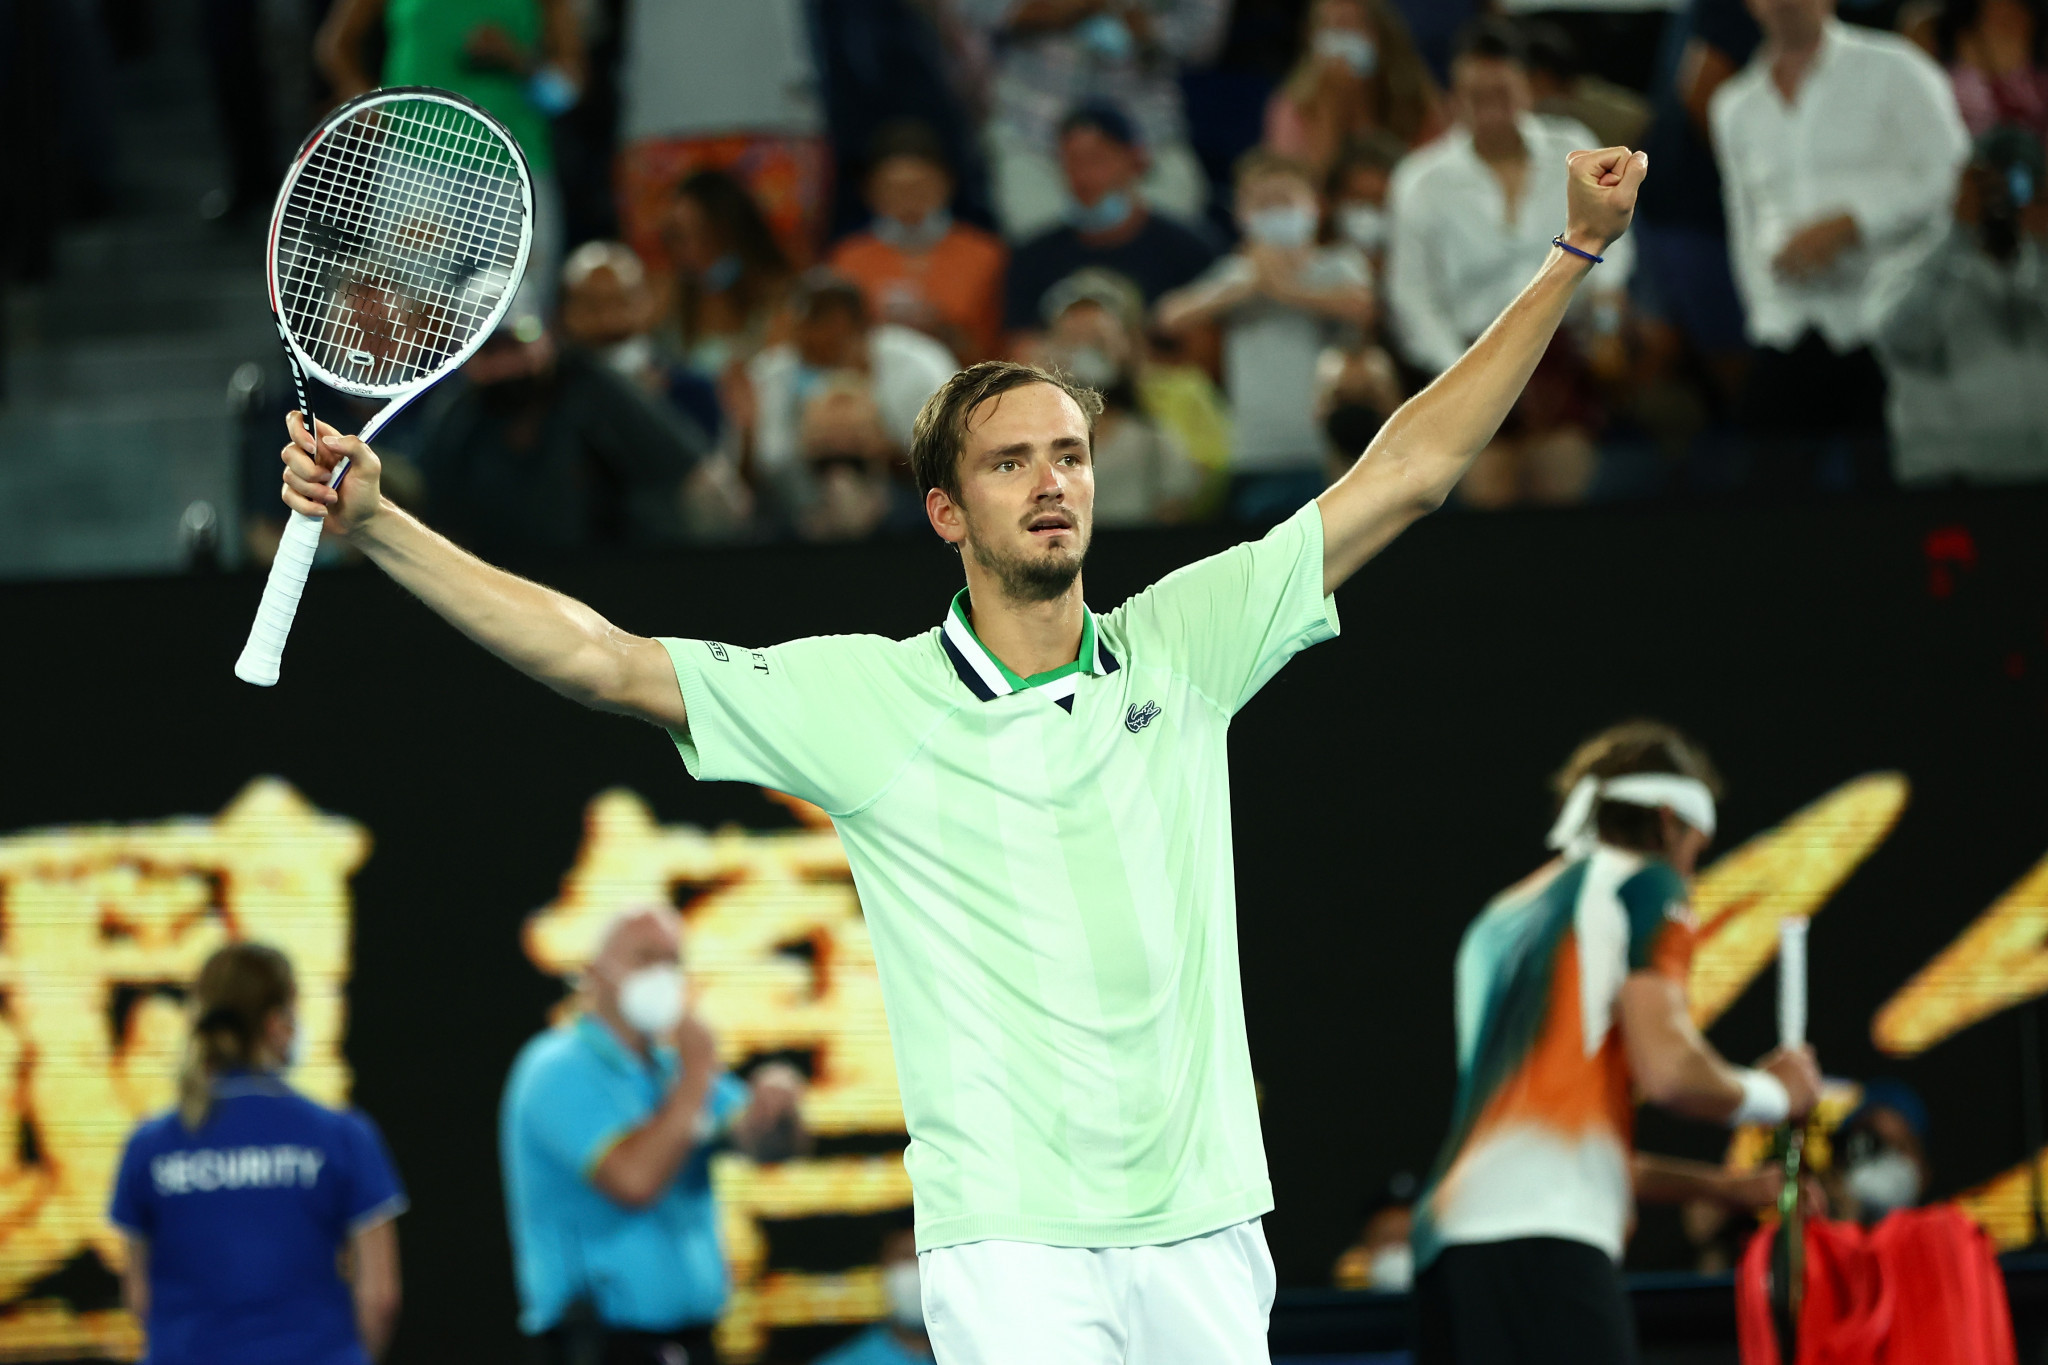 Second seed Daniil Medvedev of Russia defeated Stefanos Tsitsipas in four sets to reach the Australian Open final ©Getty Images